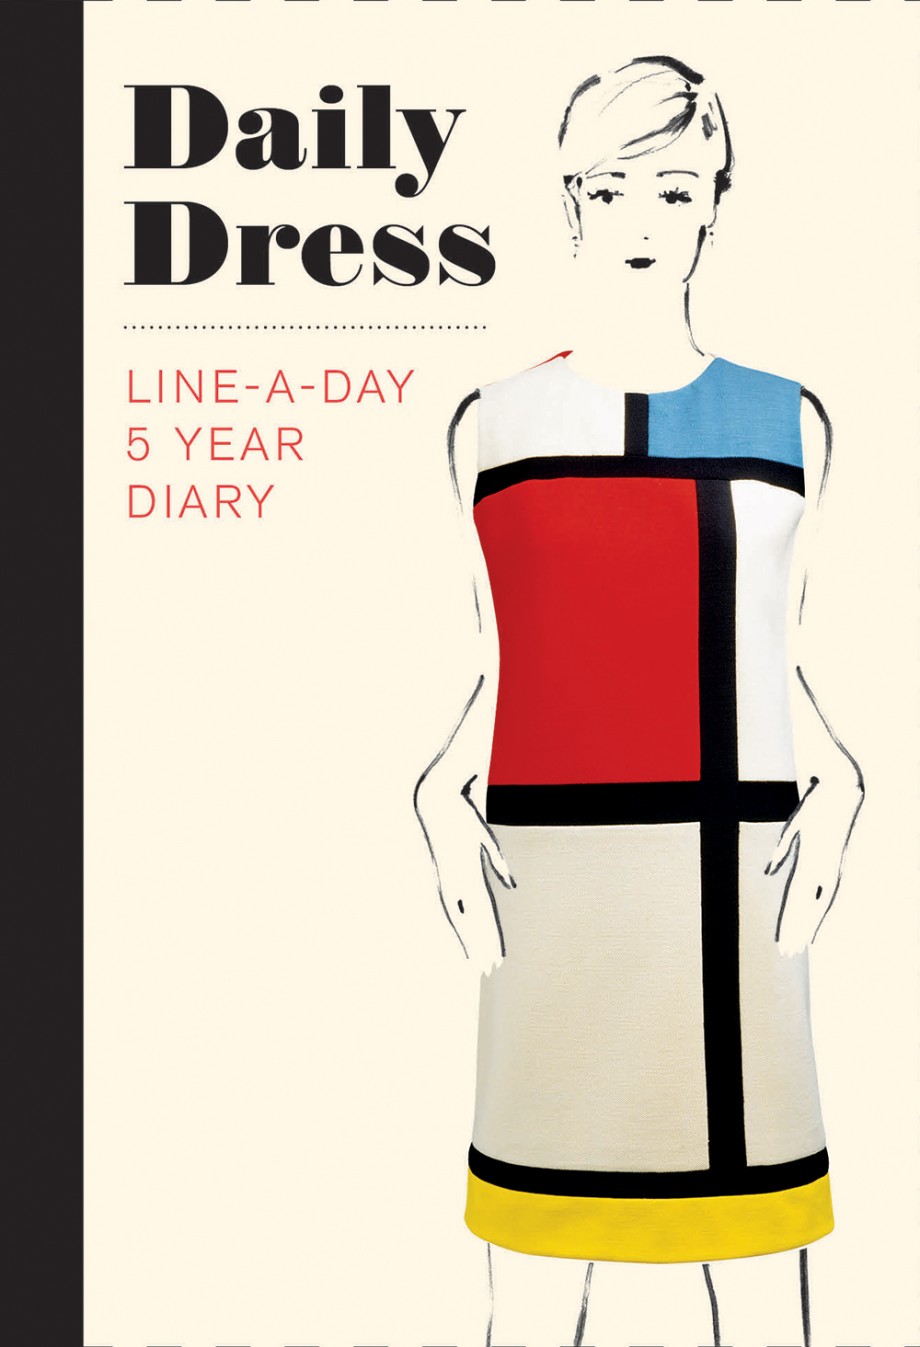 Daily Dress (Guided Journal) A Line-A-Day 5 Year Diary